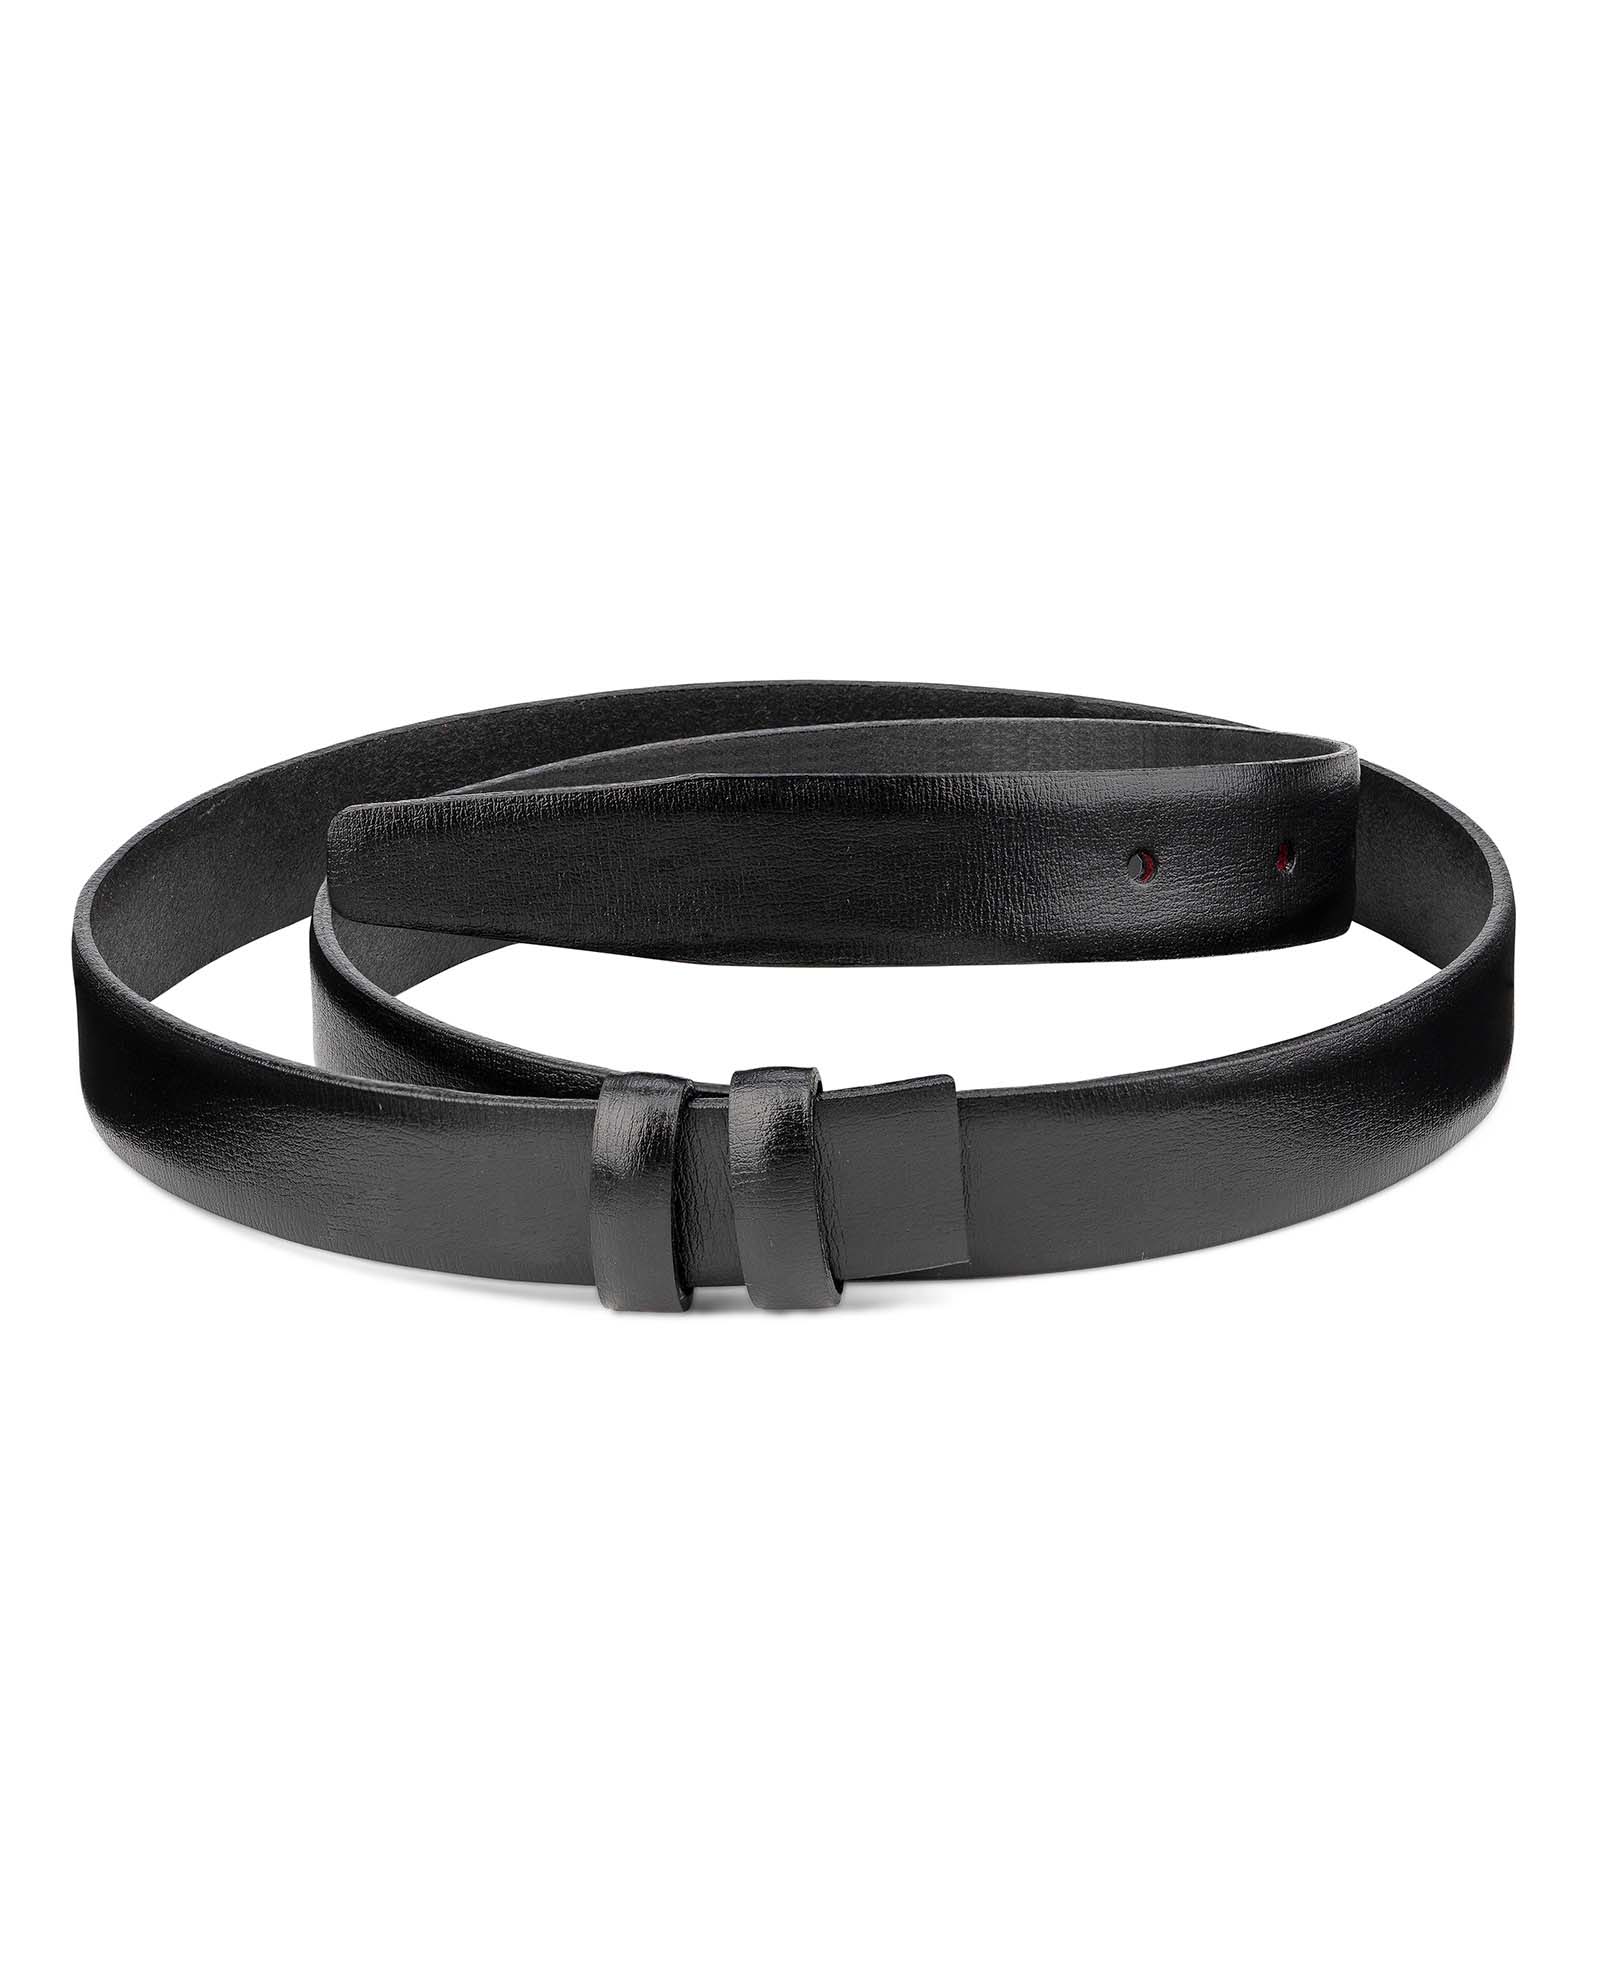 1 inch Belt Strap in Black Smooth Leather Replacement Mens buckles Italian 25 mm